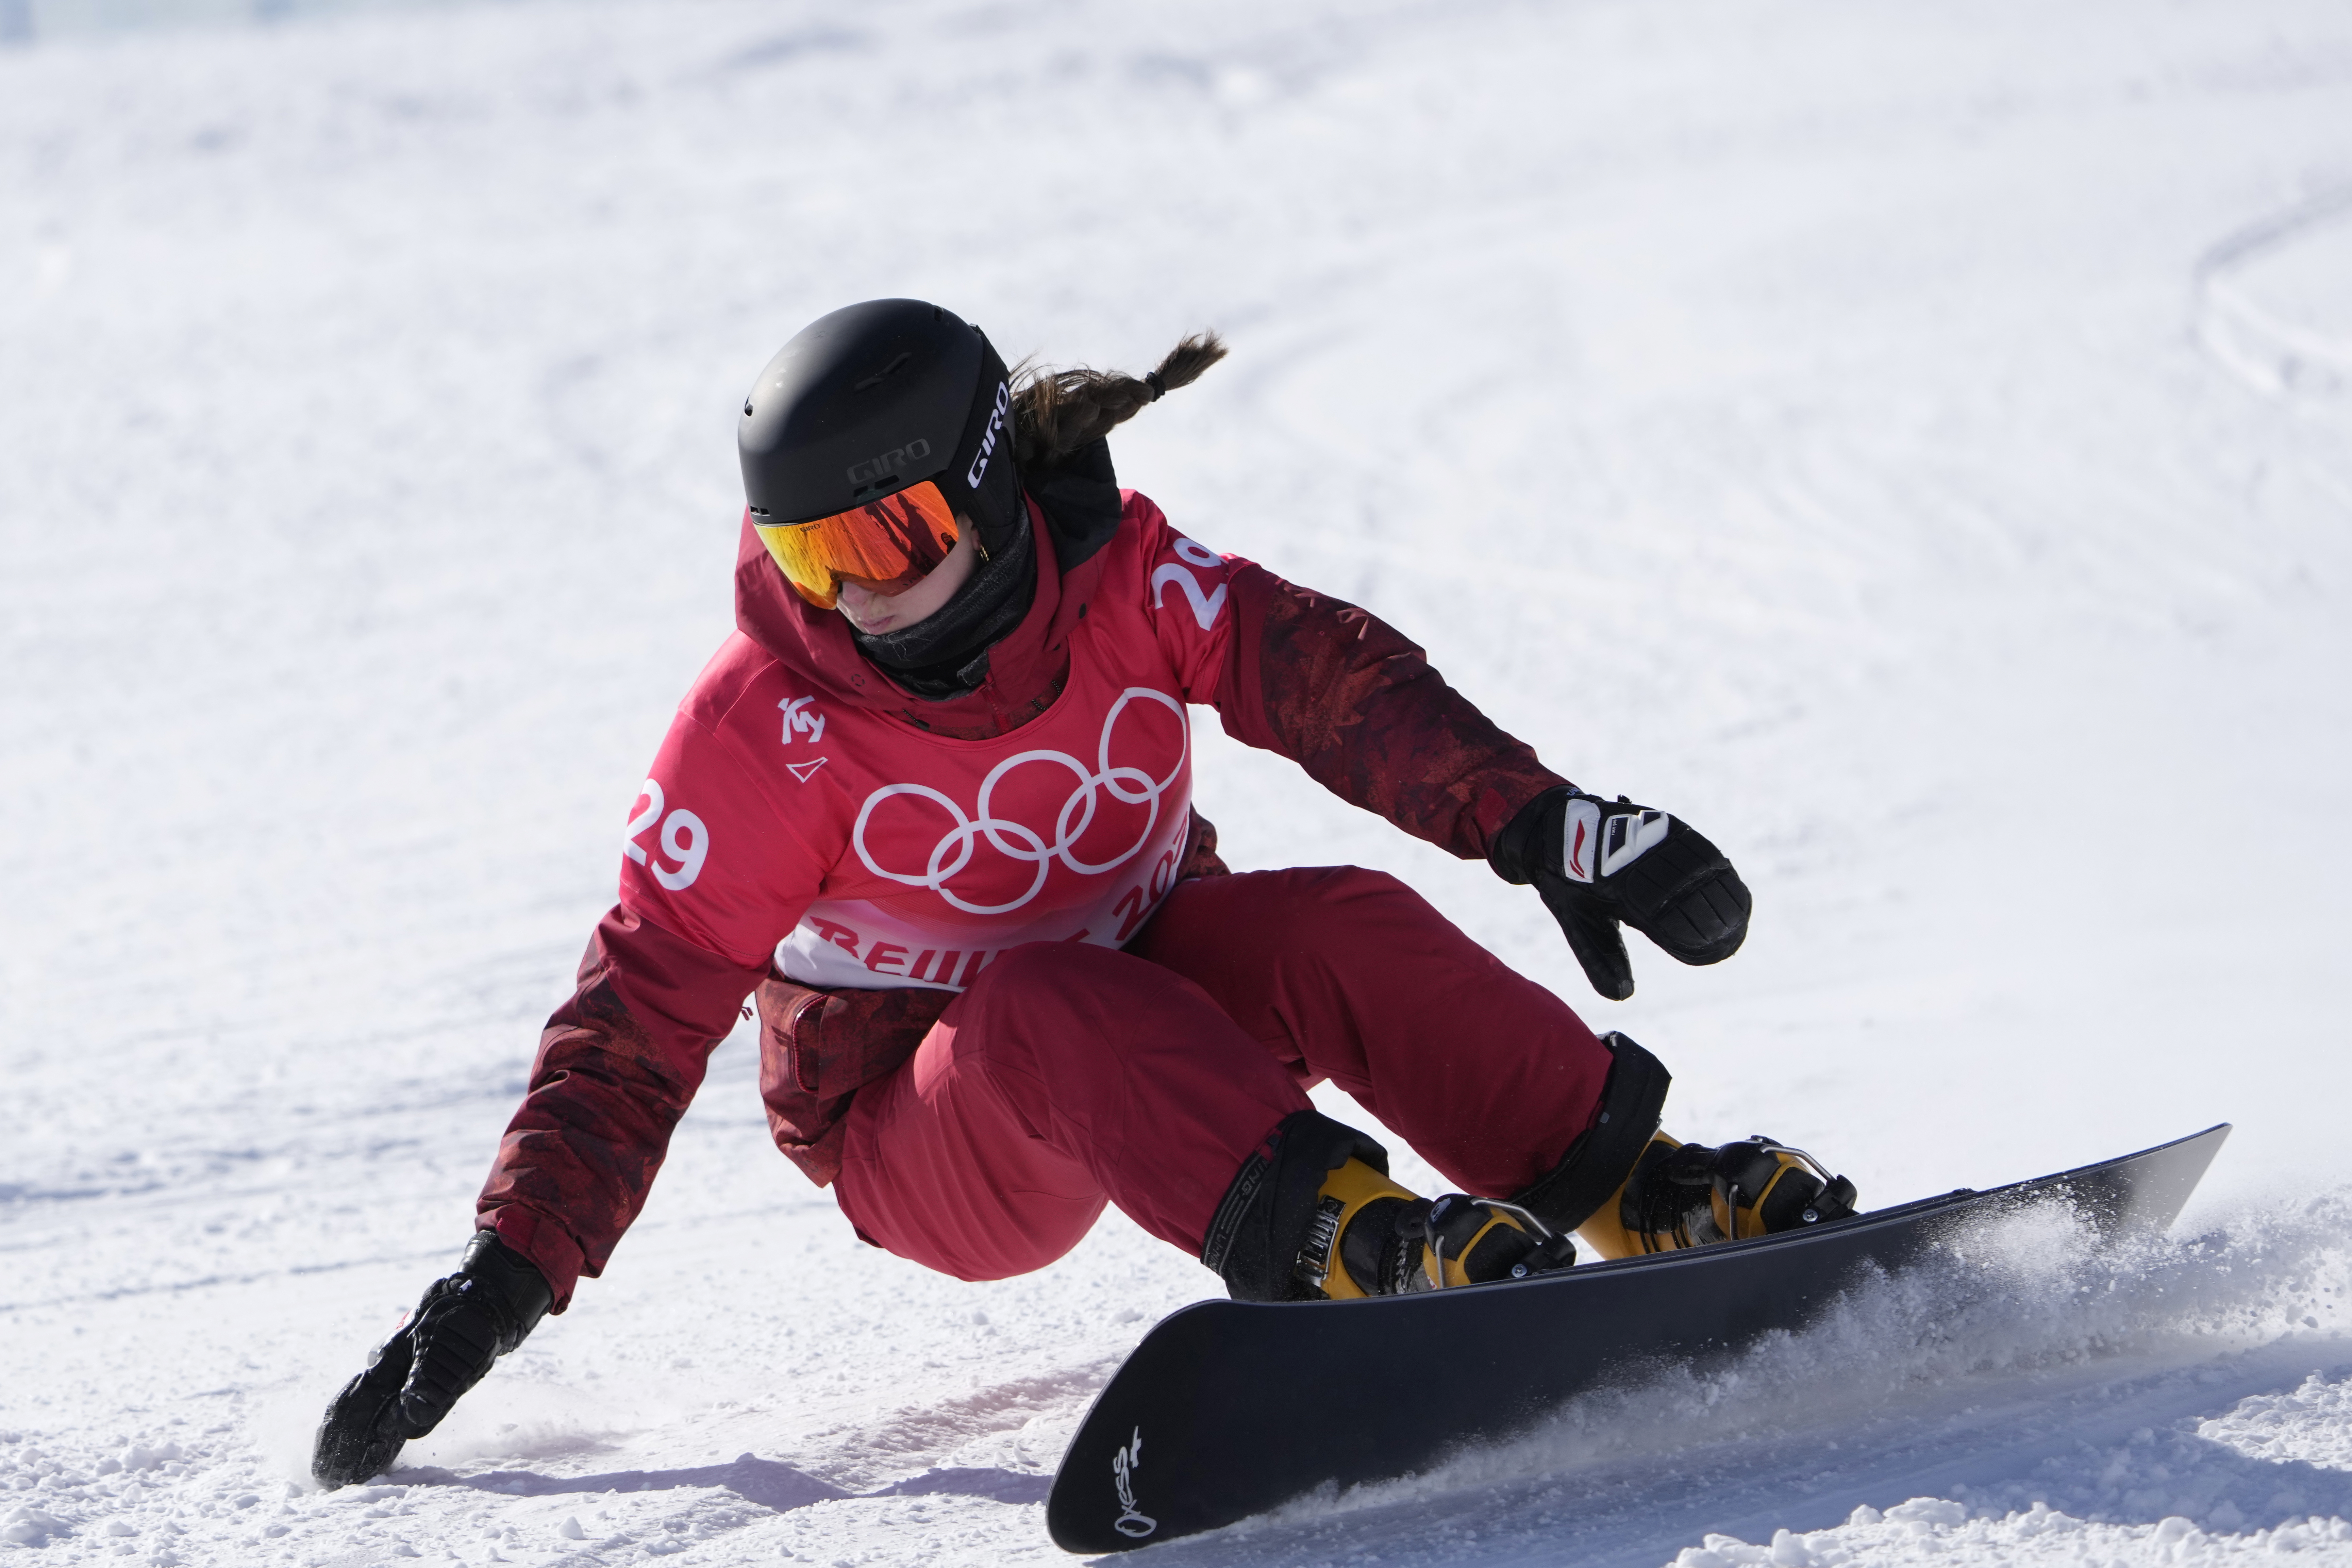 Womens snowboarding slopestyle final Live stream, start time, TV, how to watch (Winter Olympics 2022)